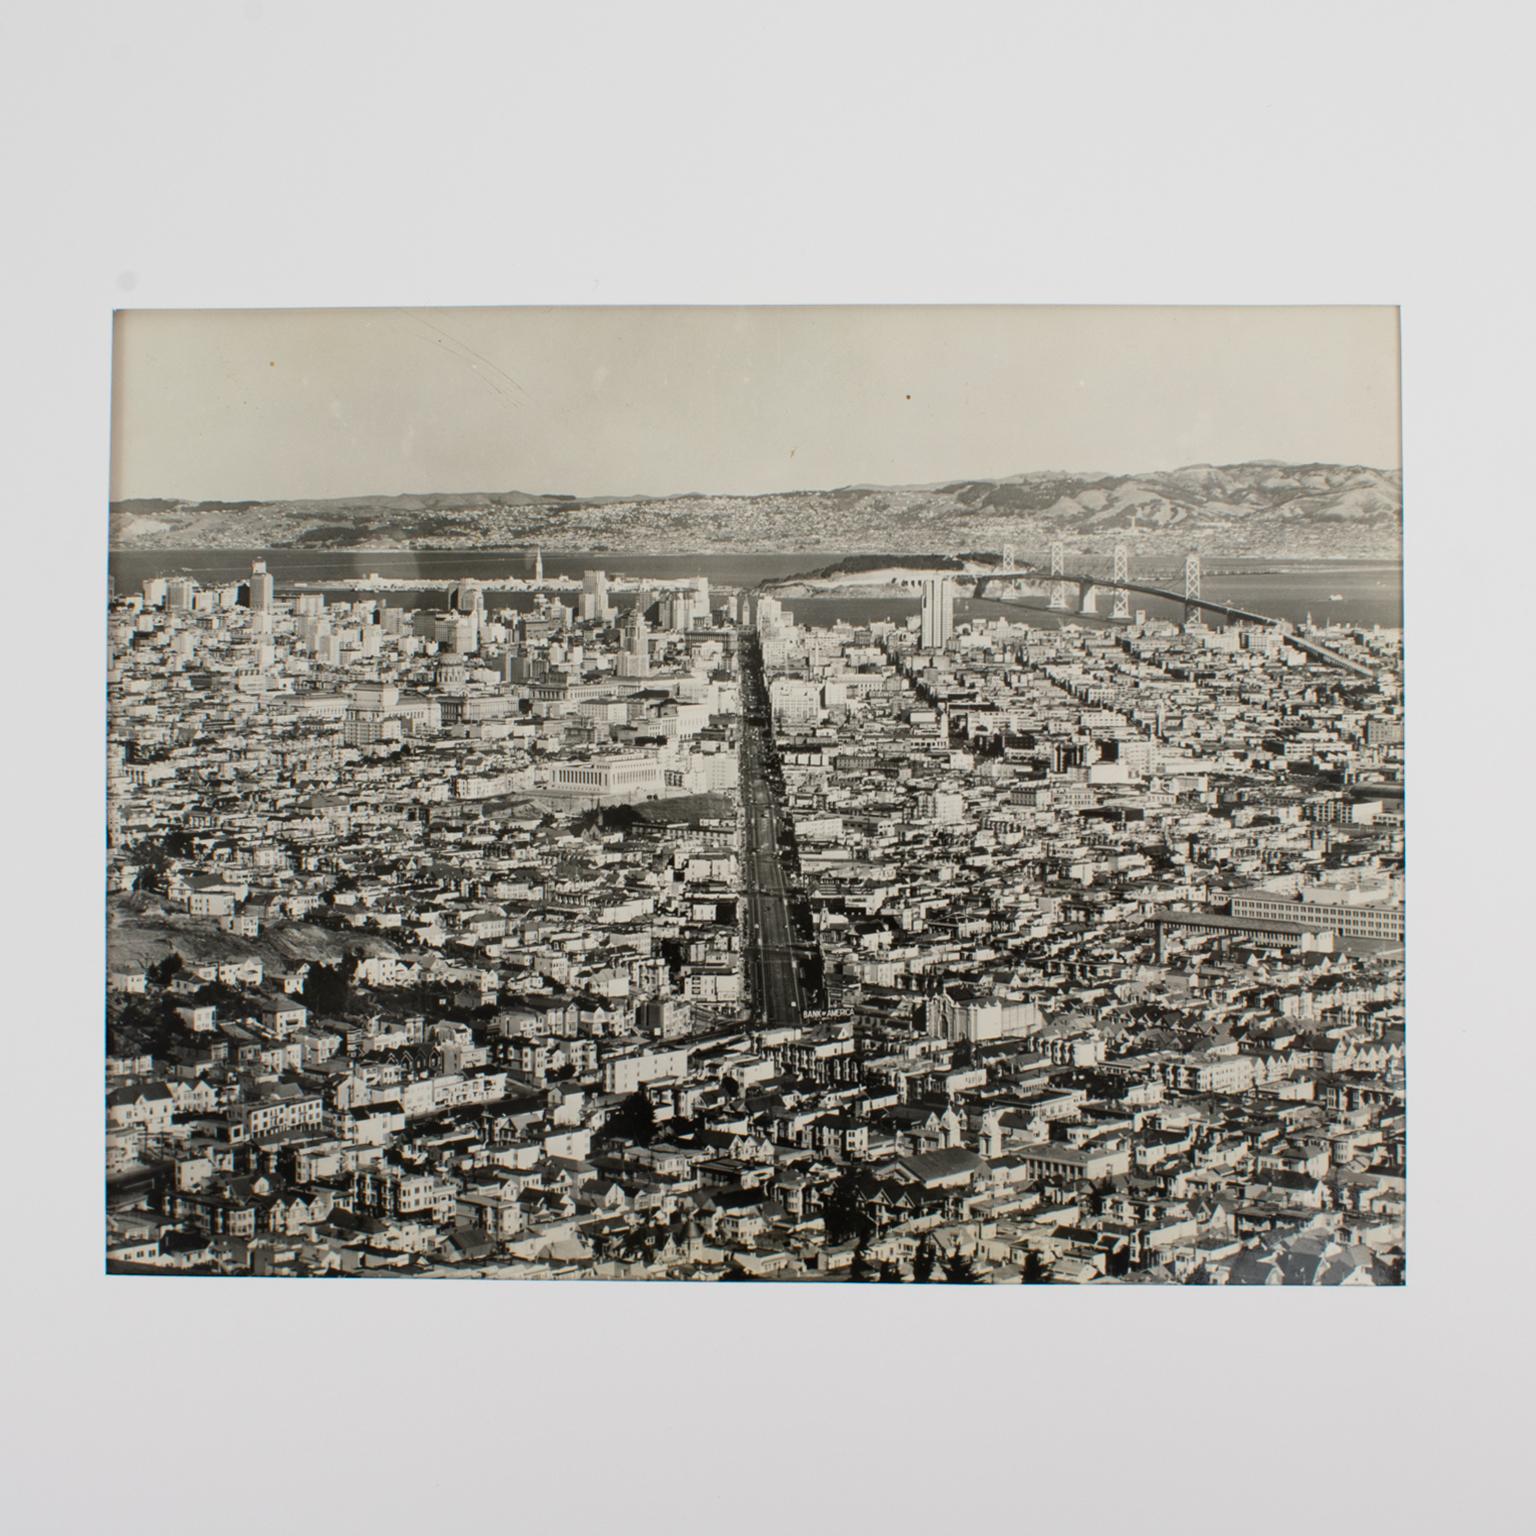 An original silver gelatin black and white photograph was distributed by American Information Services in Paris.
Panoramic view of San Francisco circa 1939.
Features:
Original silver gelatin print photography unframed.
Official Information Services